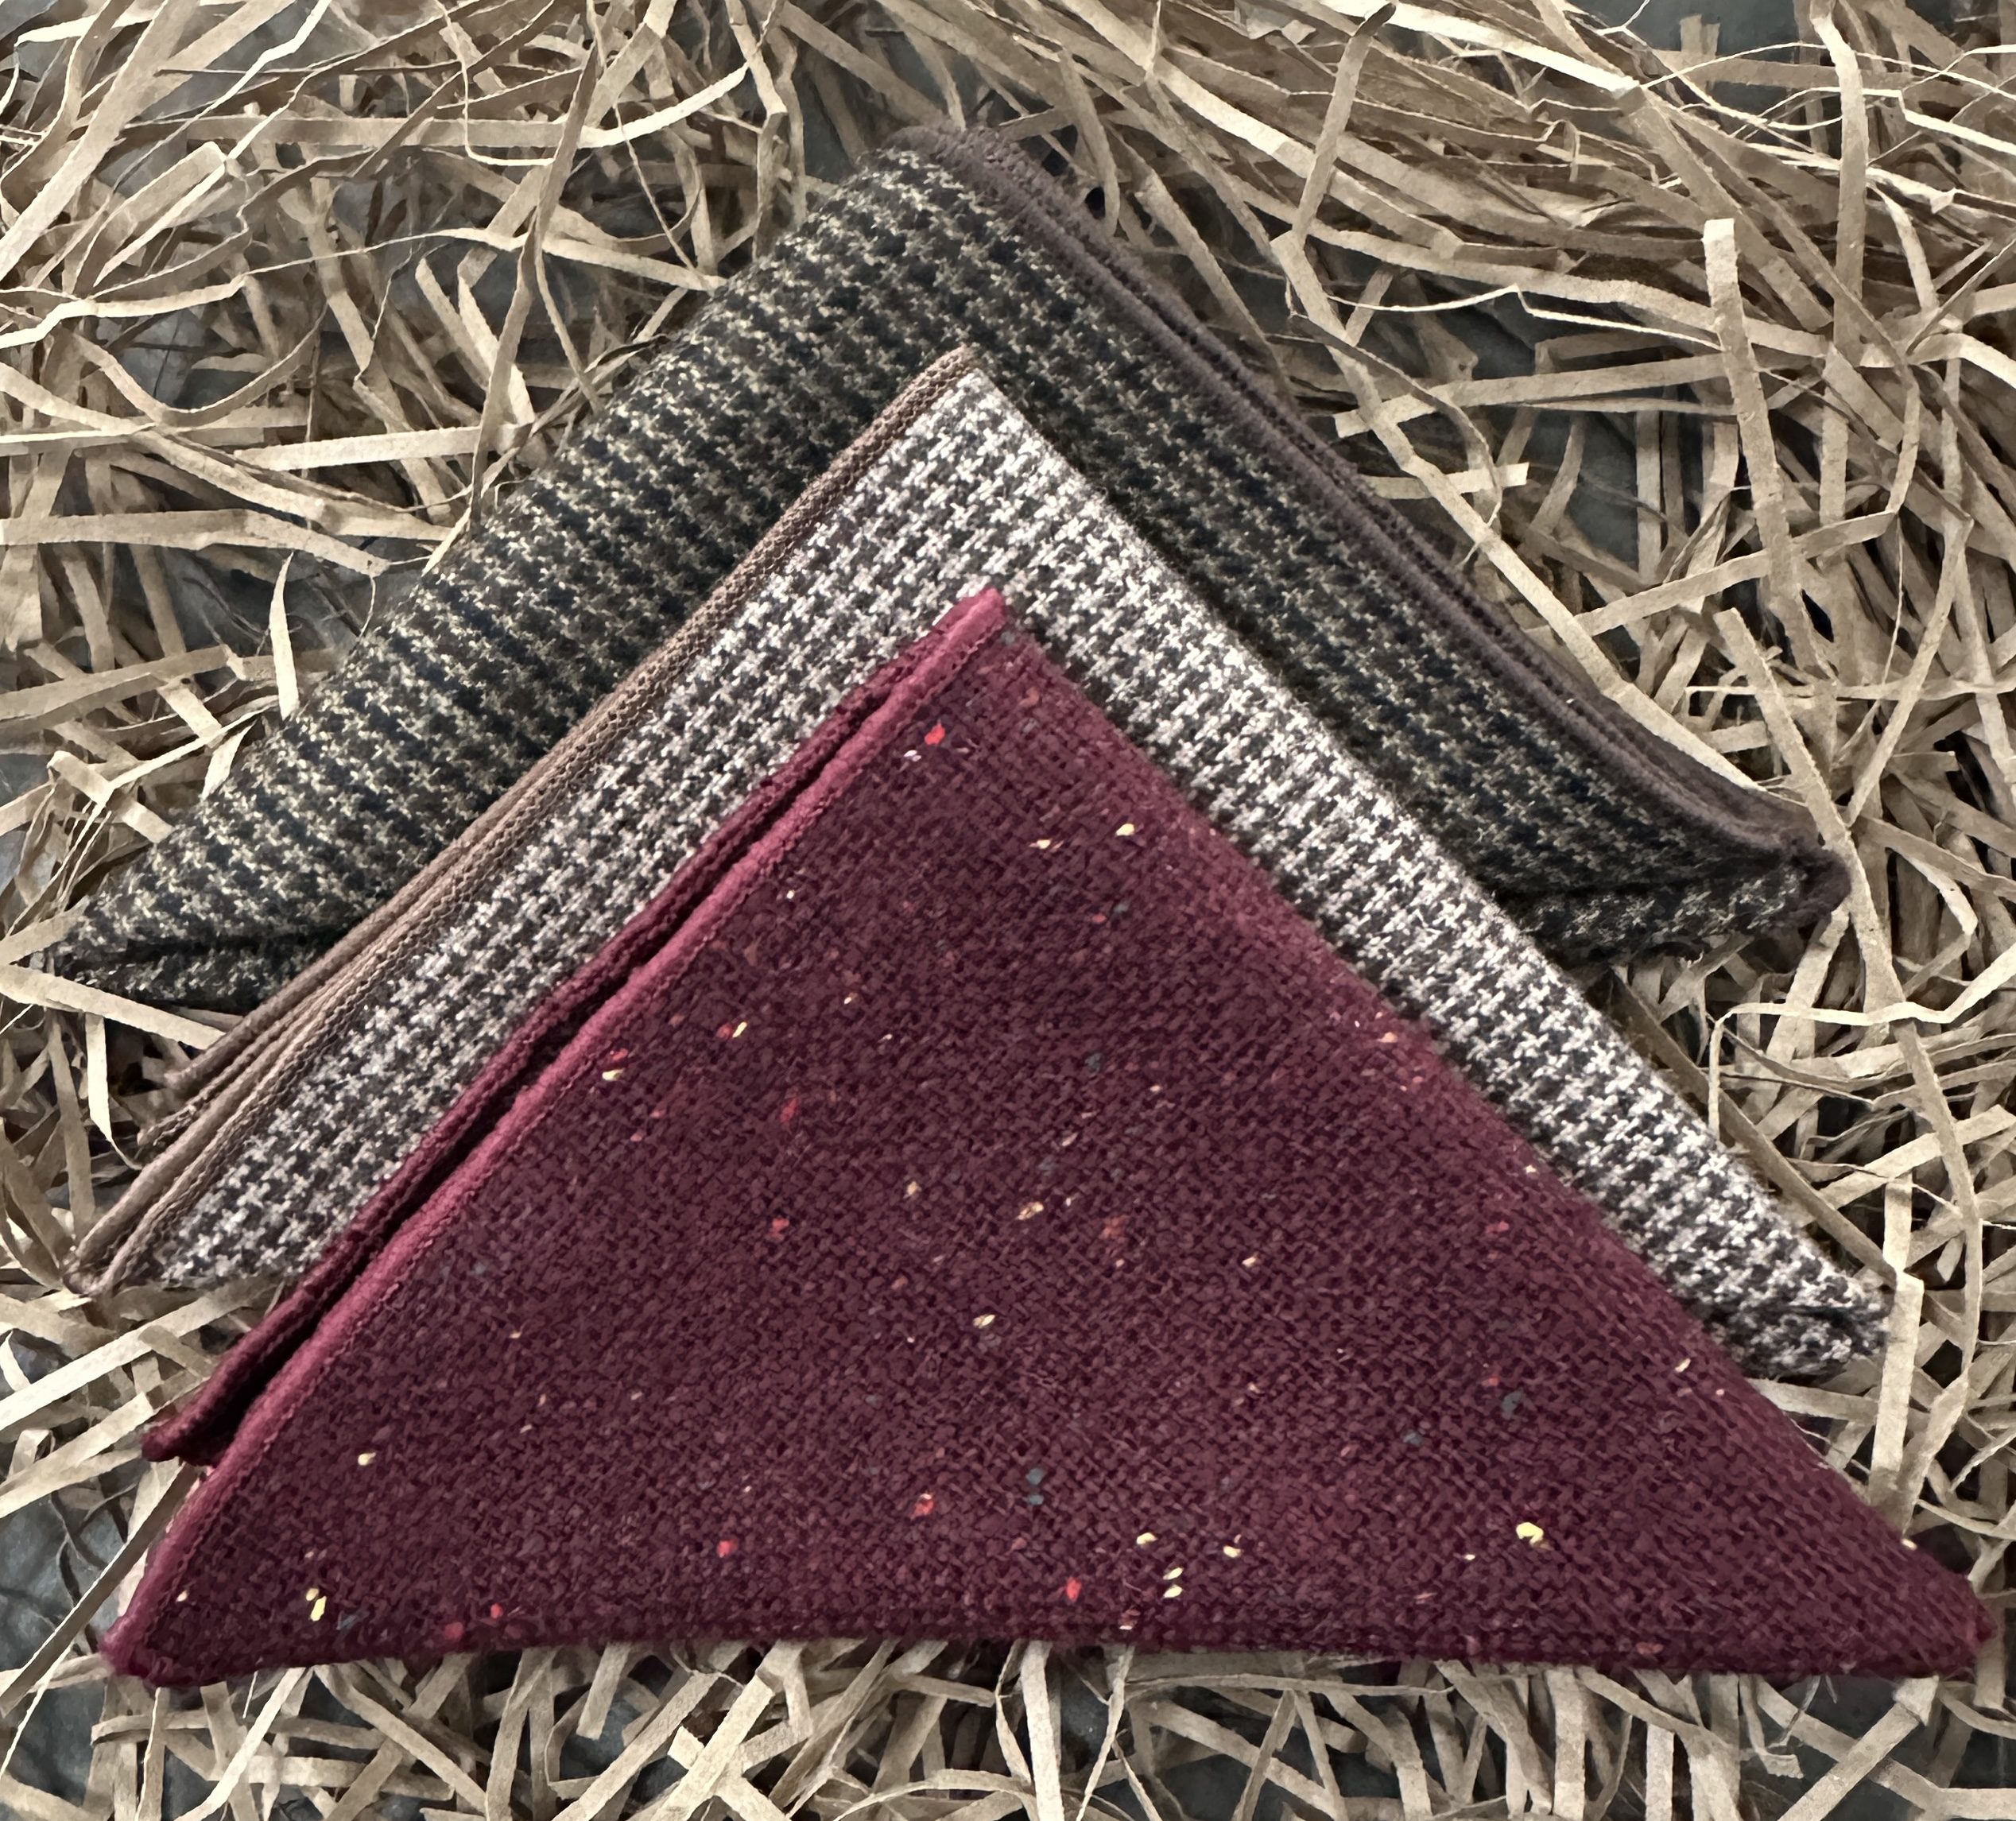 Deep red and houndstooth brown wool pocket square set for mens and groomsmen gifts